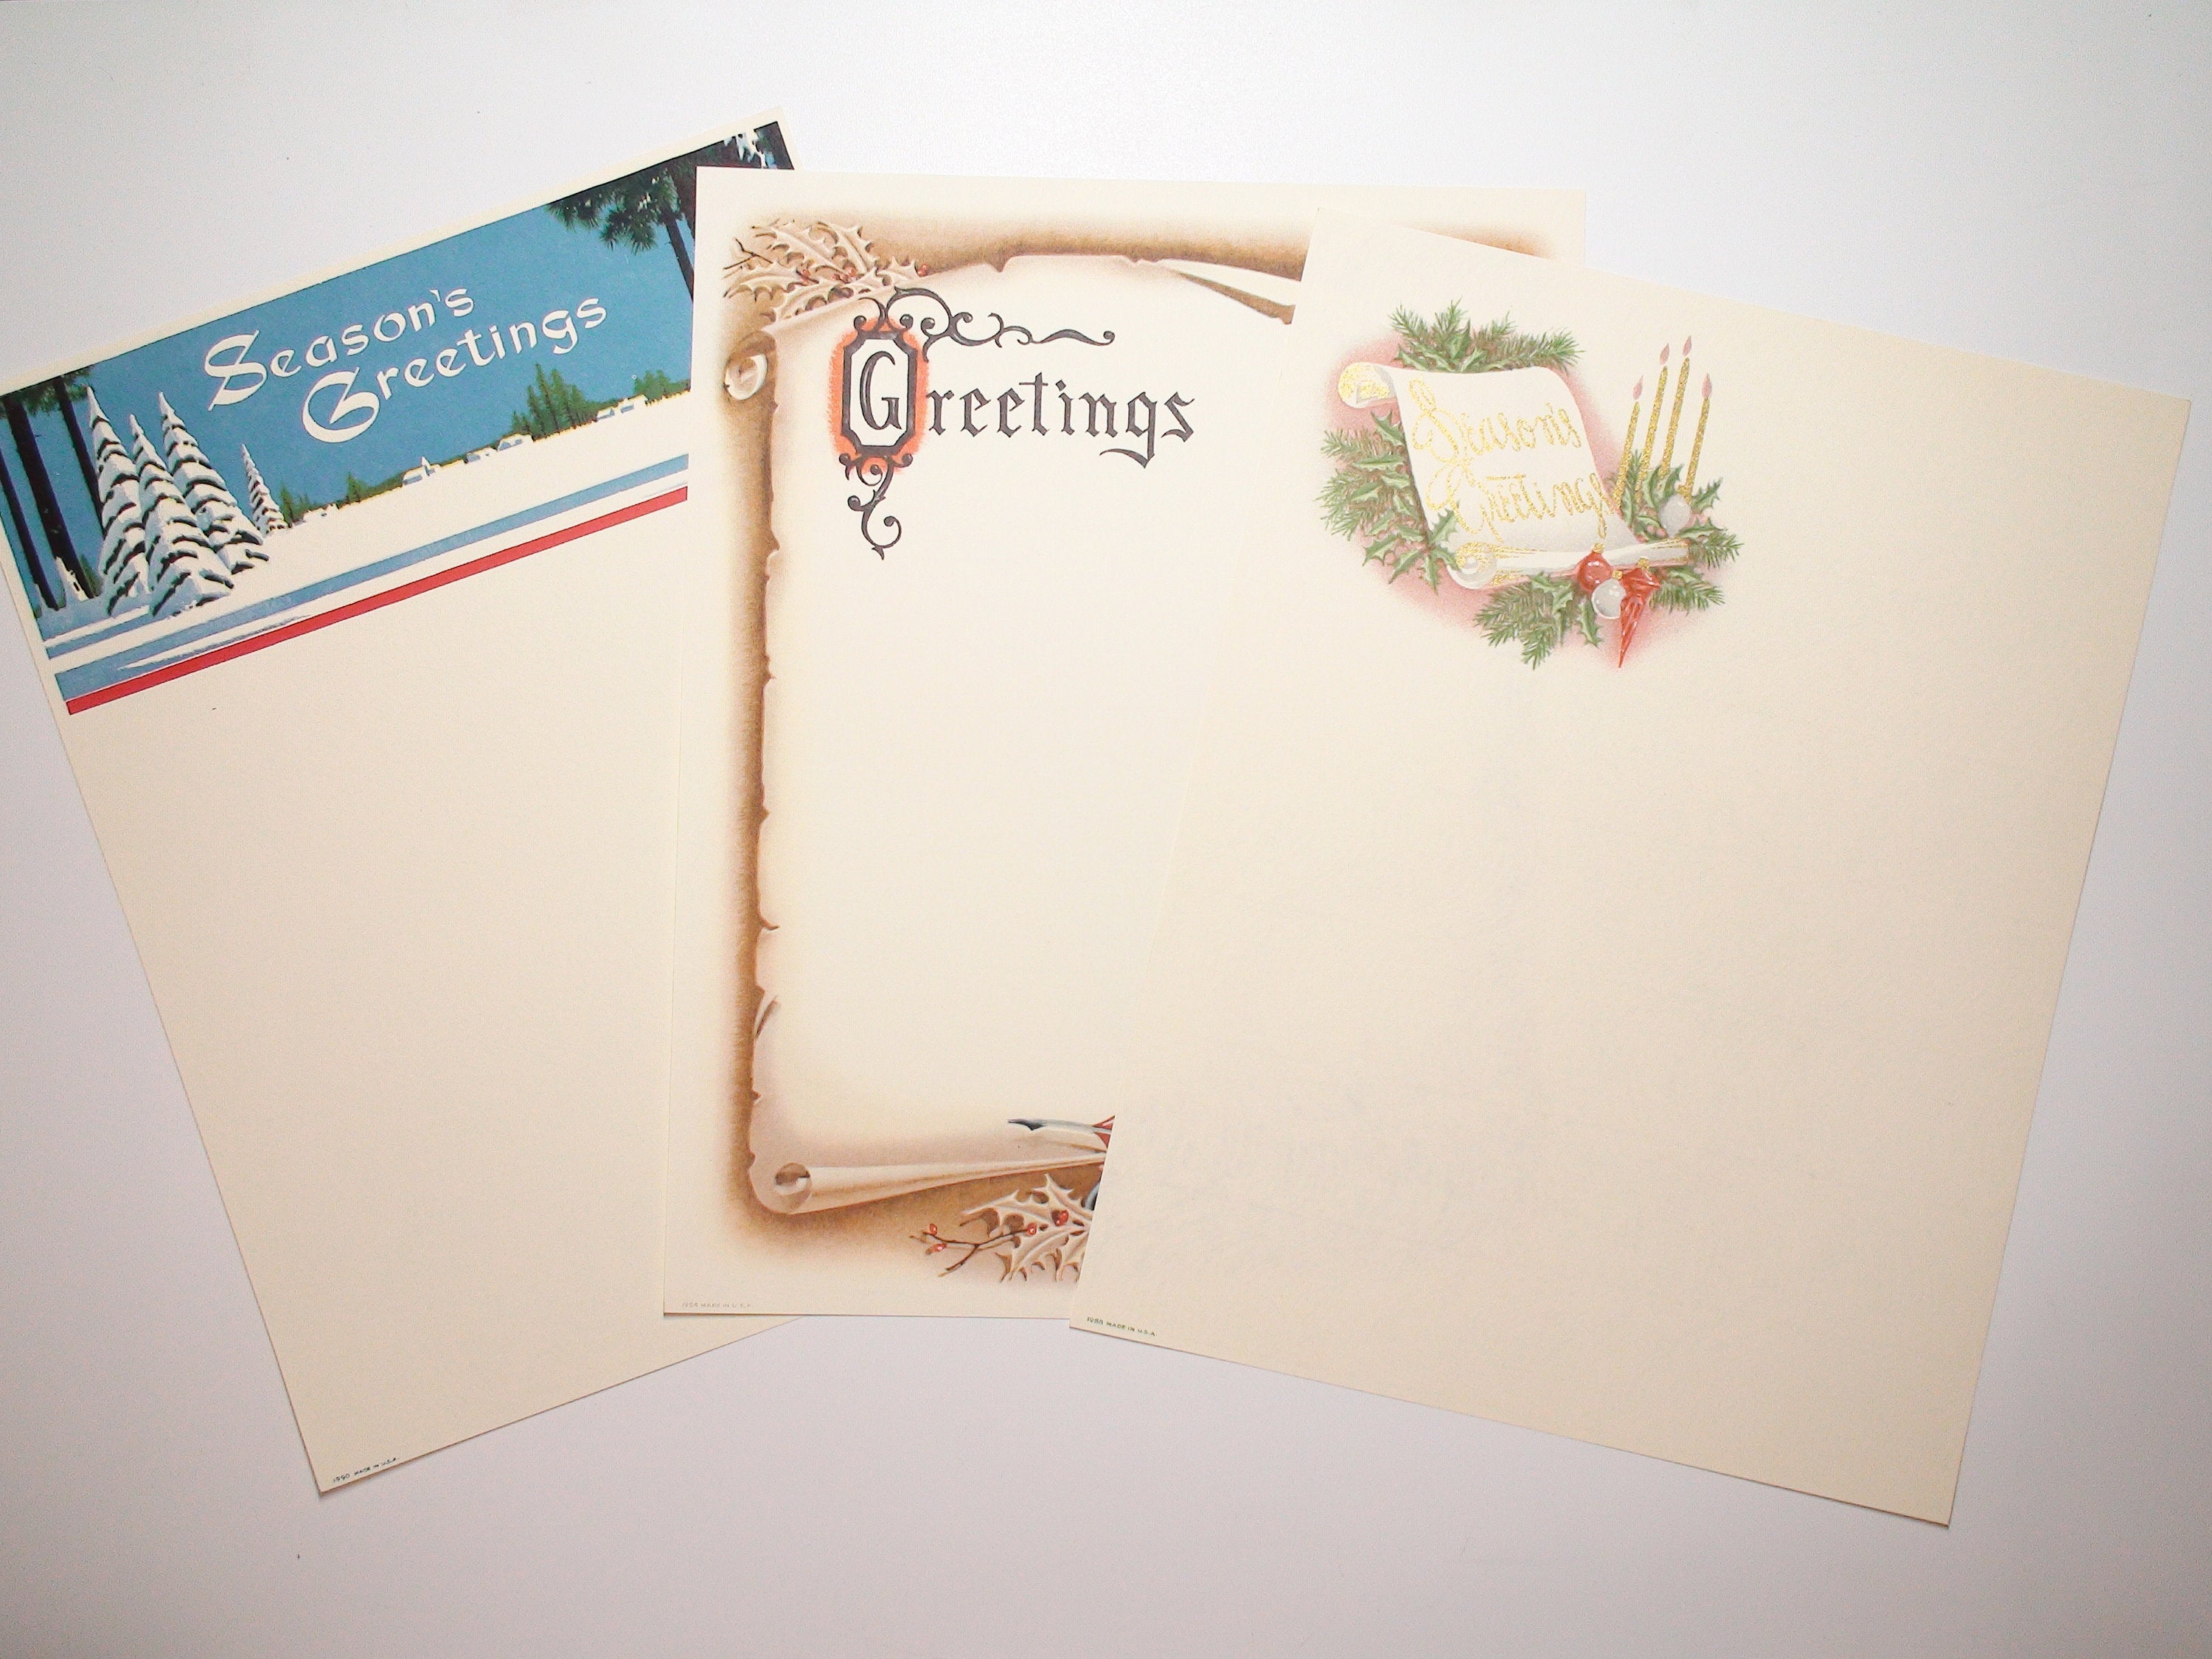 20 Sheets of Vintage Christmas Holiday Border Stationery/Letterhead for Notes and Letters, Gilt Accents, c1960s-80s